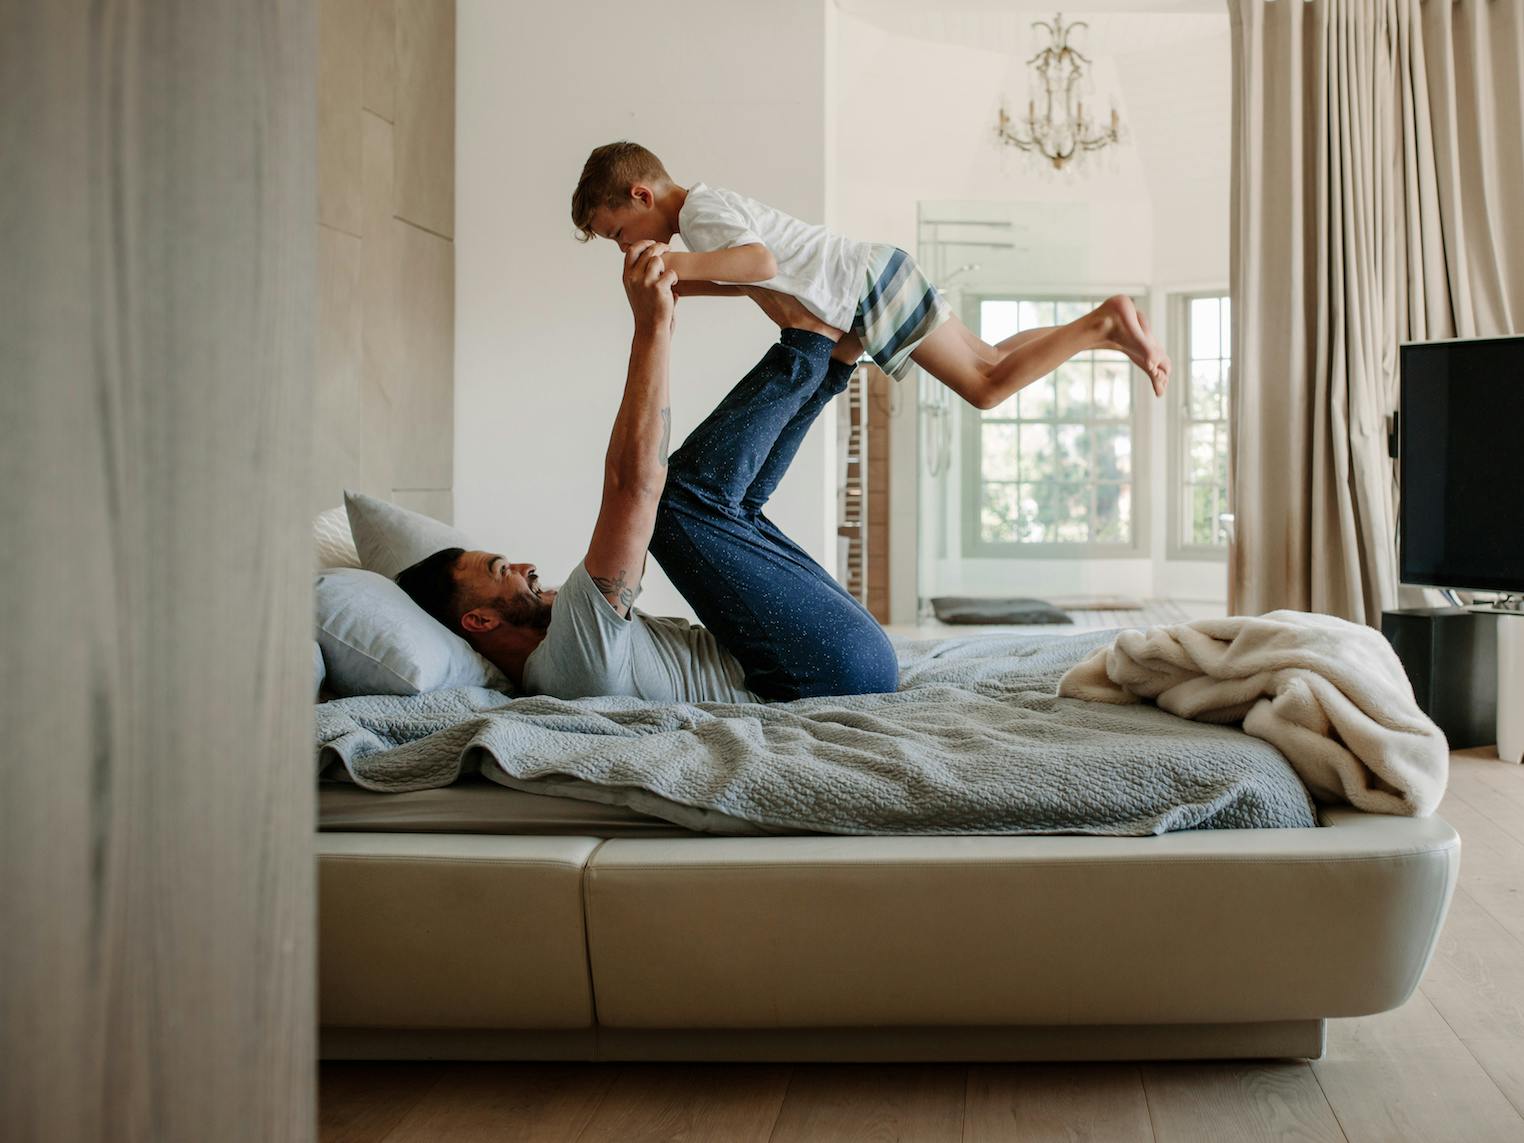 Father raising child in the bed.